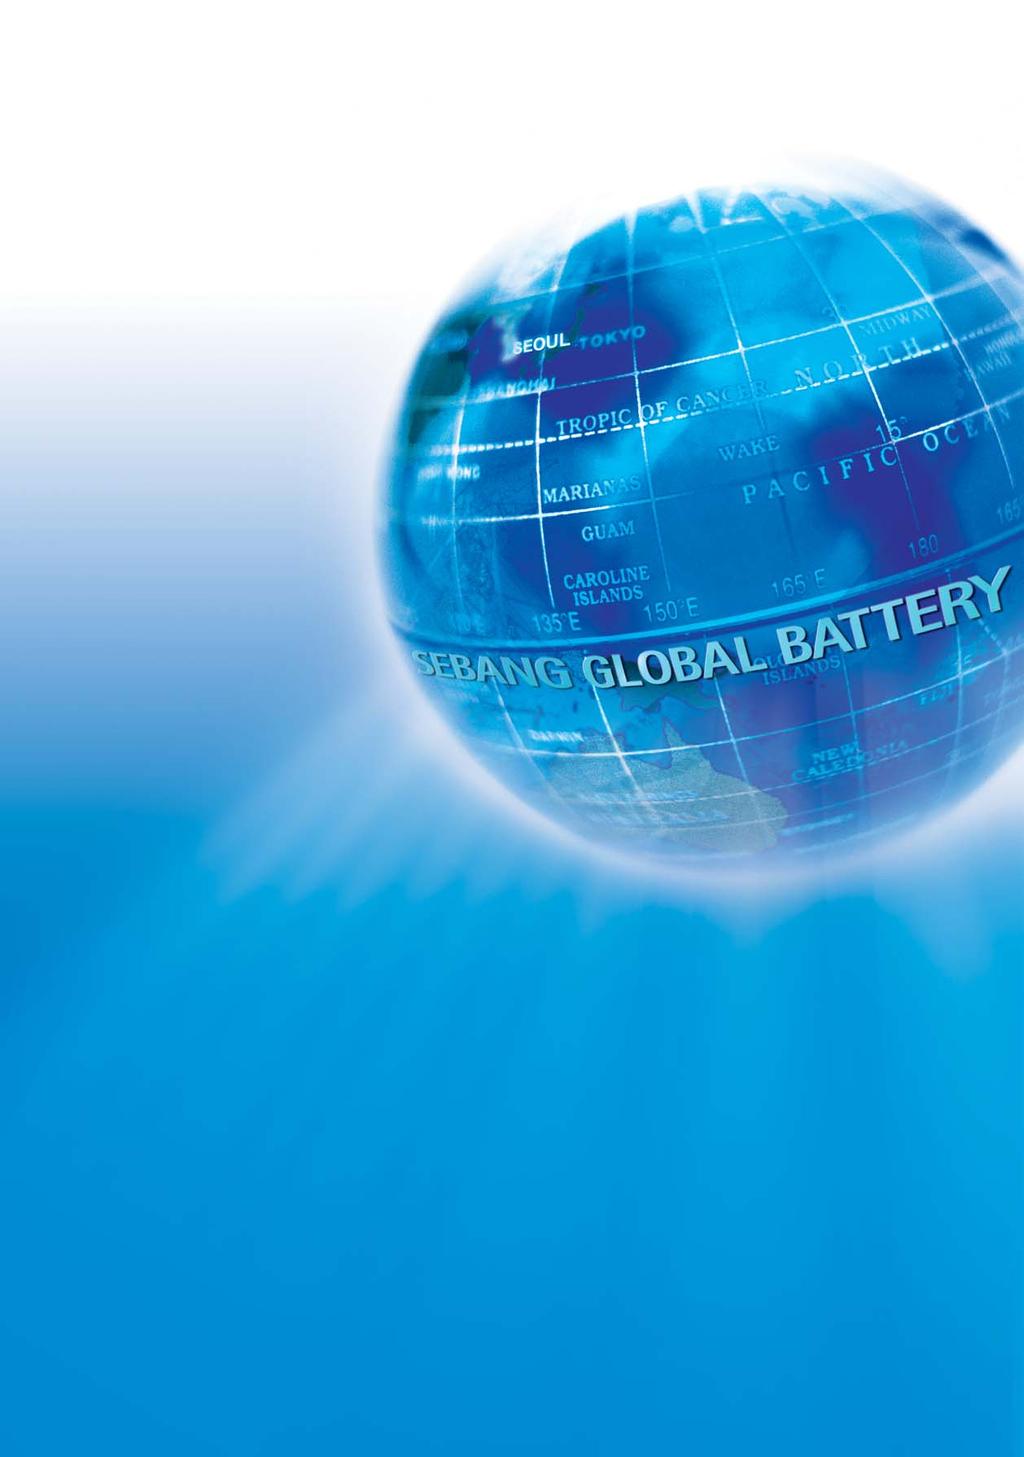 www.gbattery.com We are developing from world-moving batteries to seize a future of advanced energy.